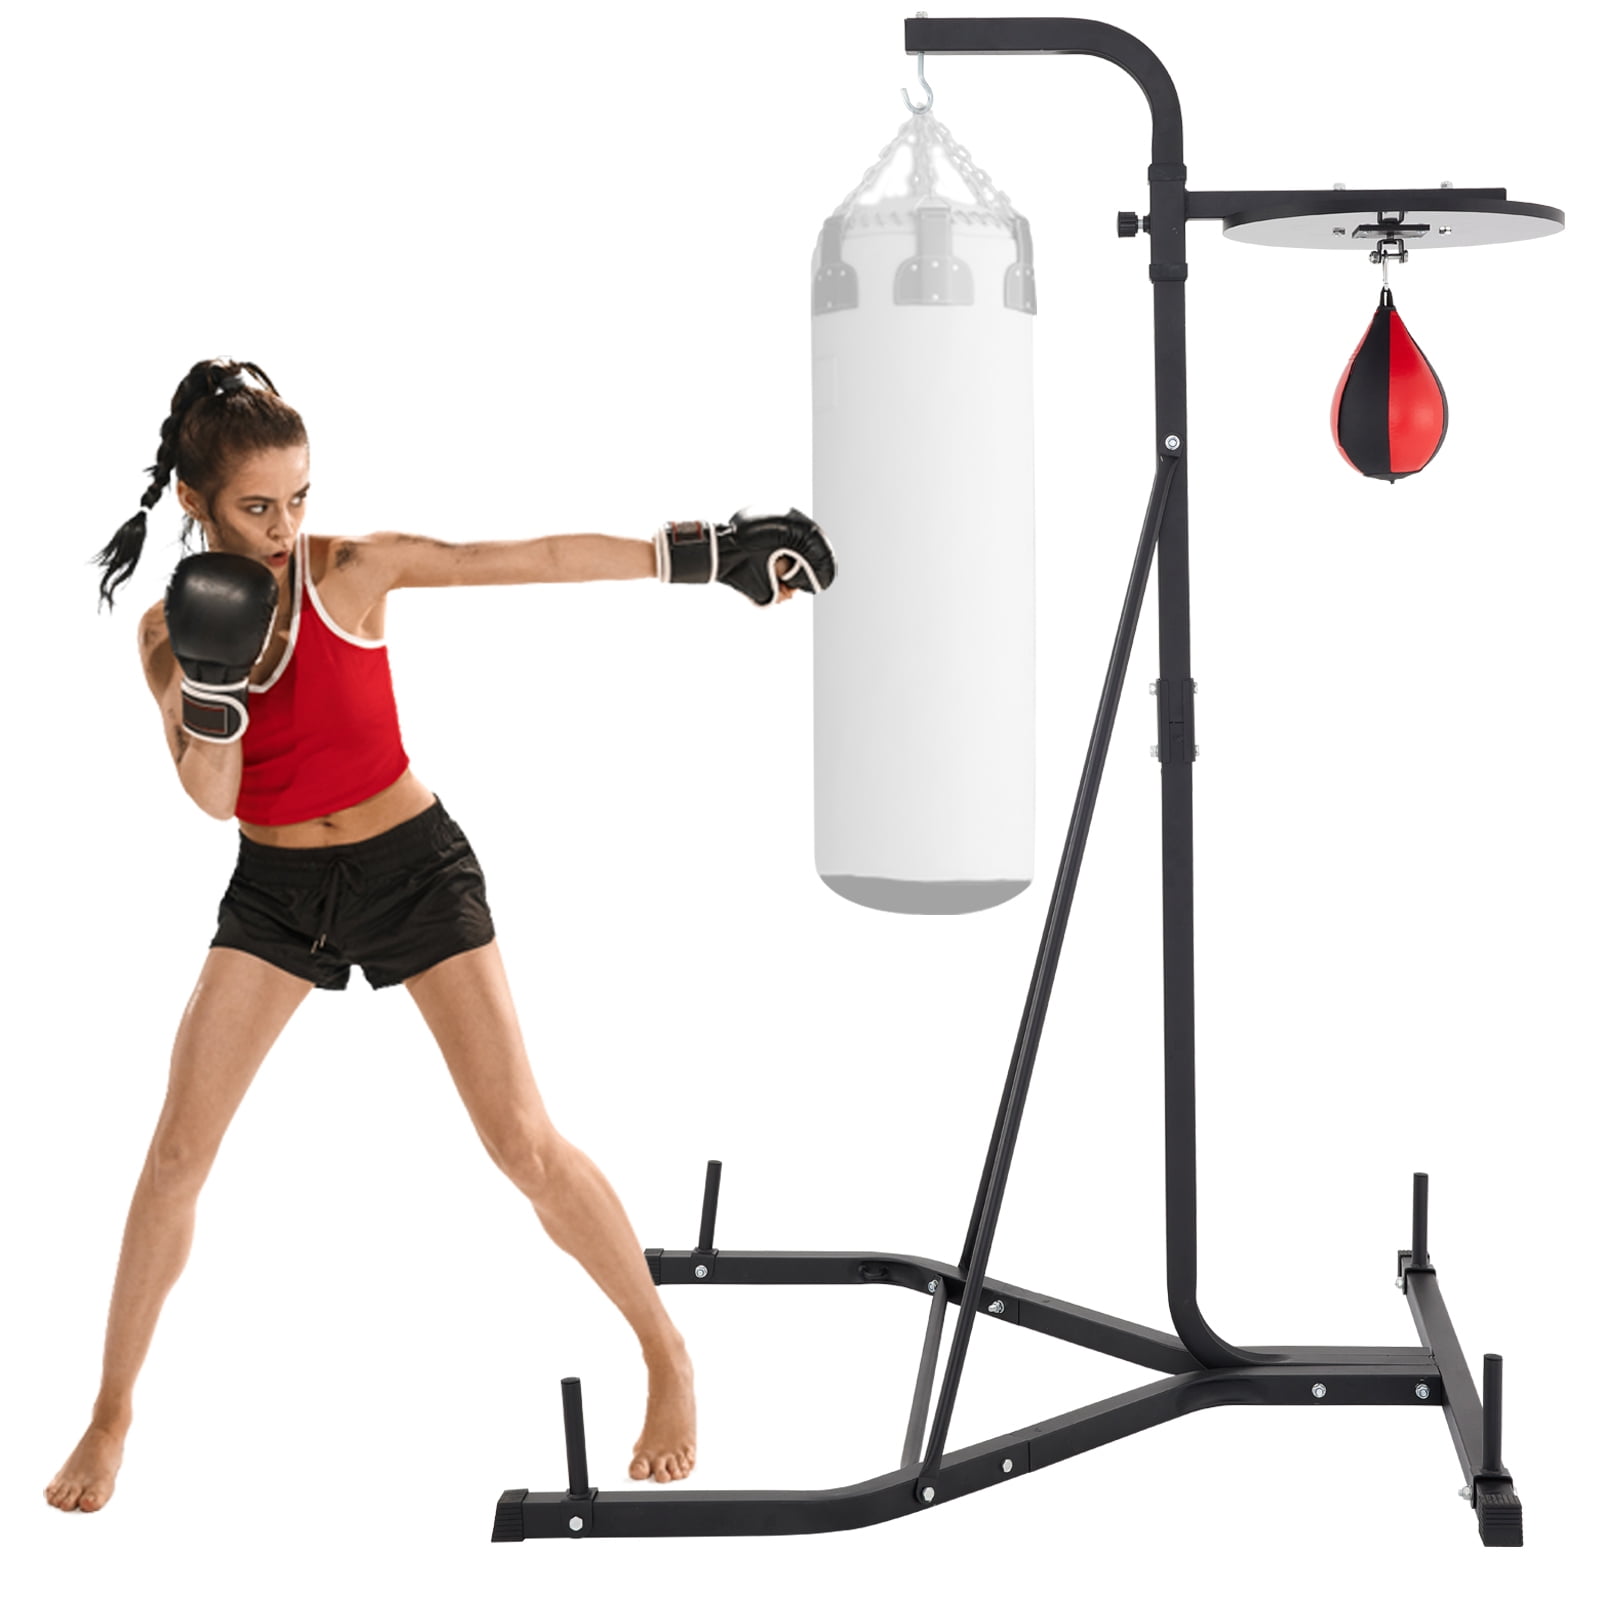 VEVORbrand Free Standing Punching Bag Stand, Unisex Boxing Set, Foldable Single Station Heavy Bag Stand, Punching Ball, Boxing Punching Speed Ball, Boxing Bag with Boxing Rack, for Training